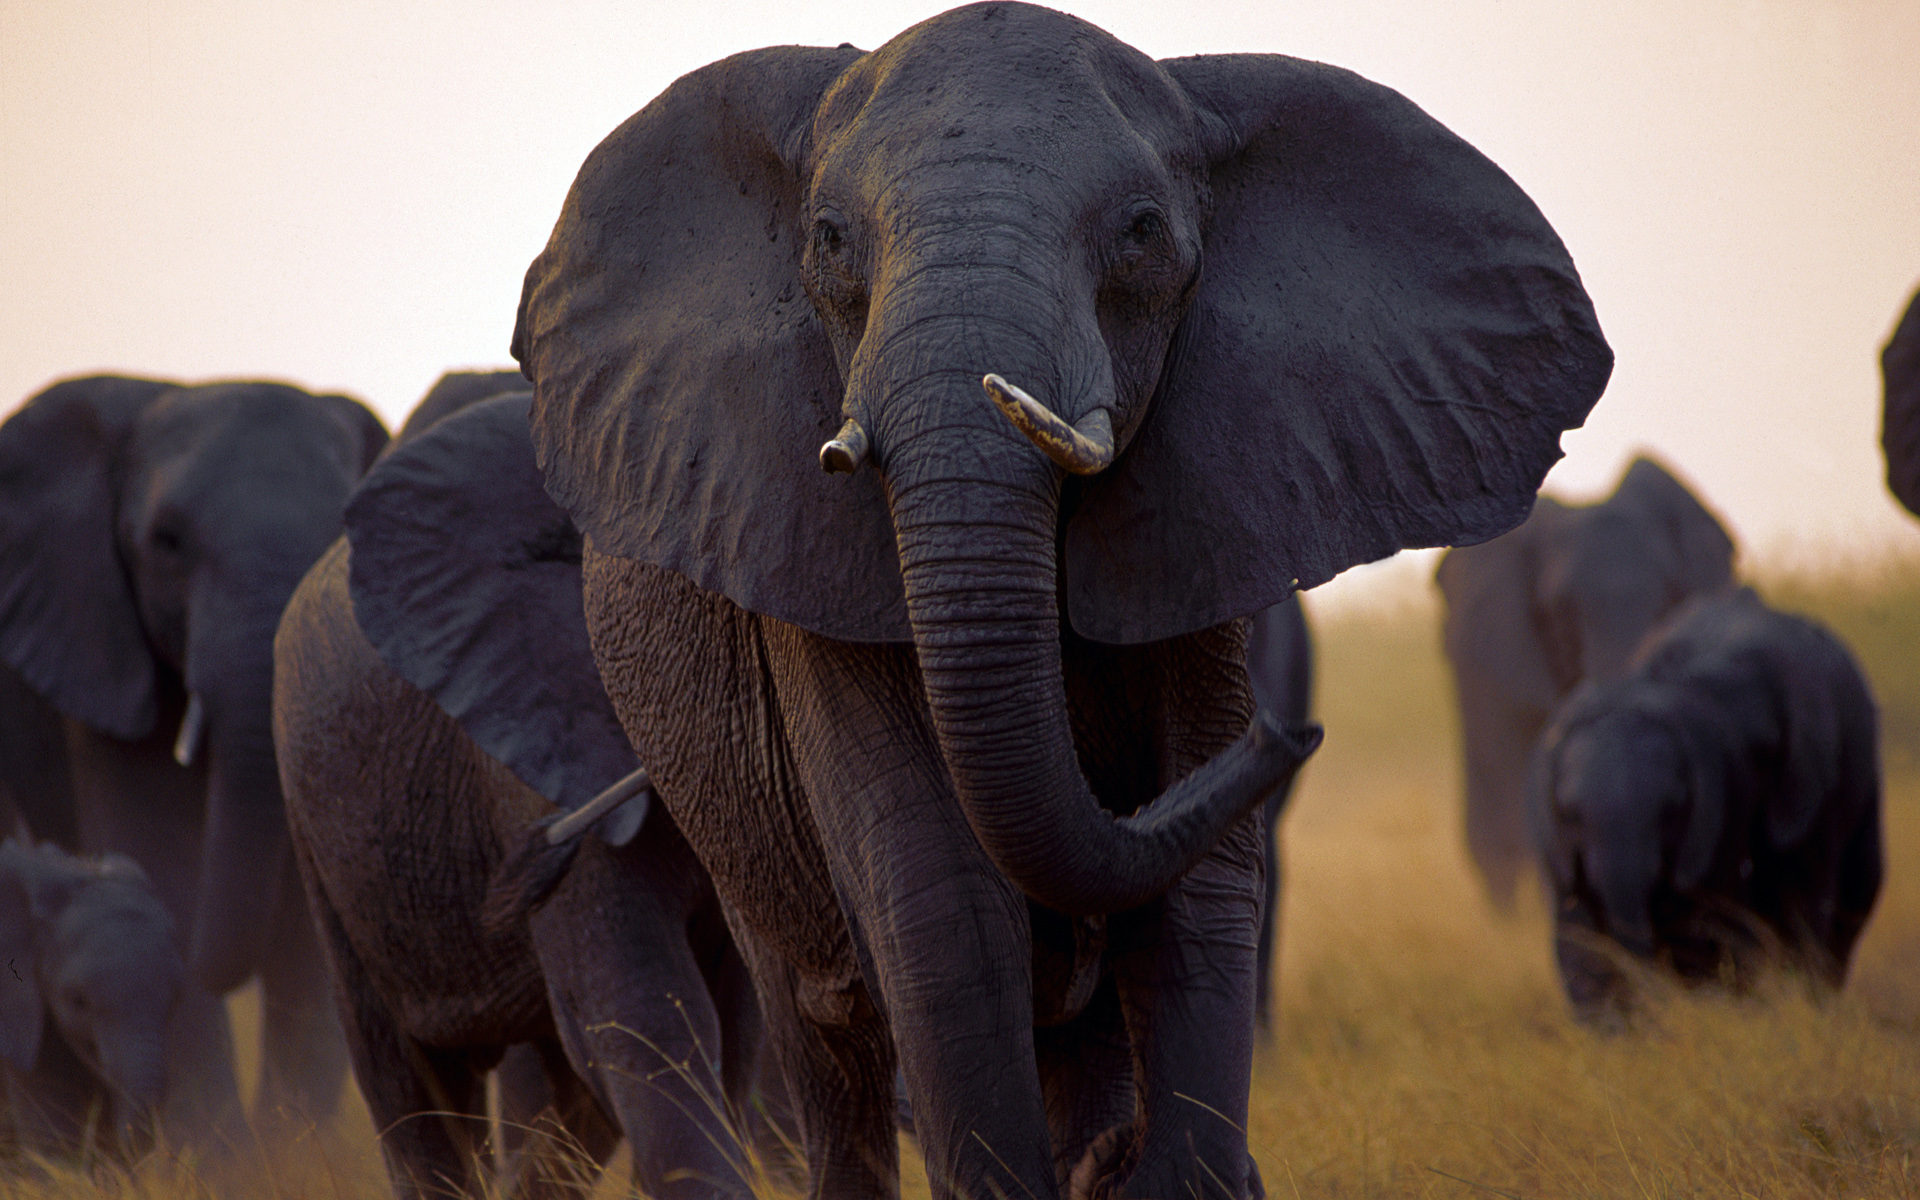 Elephant Full Hd Wallpaper And Background Image | 1920X1200 | Id:389845